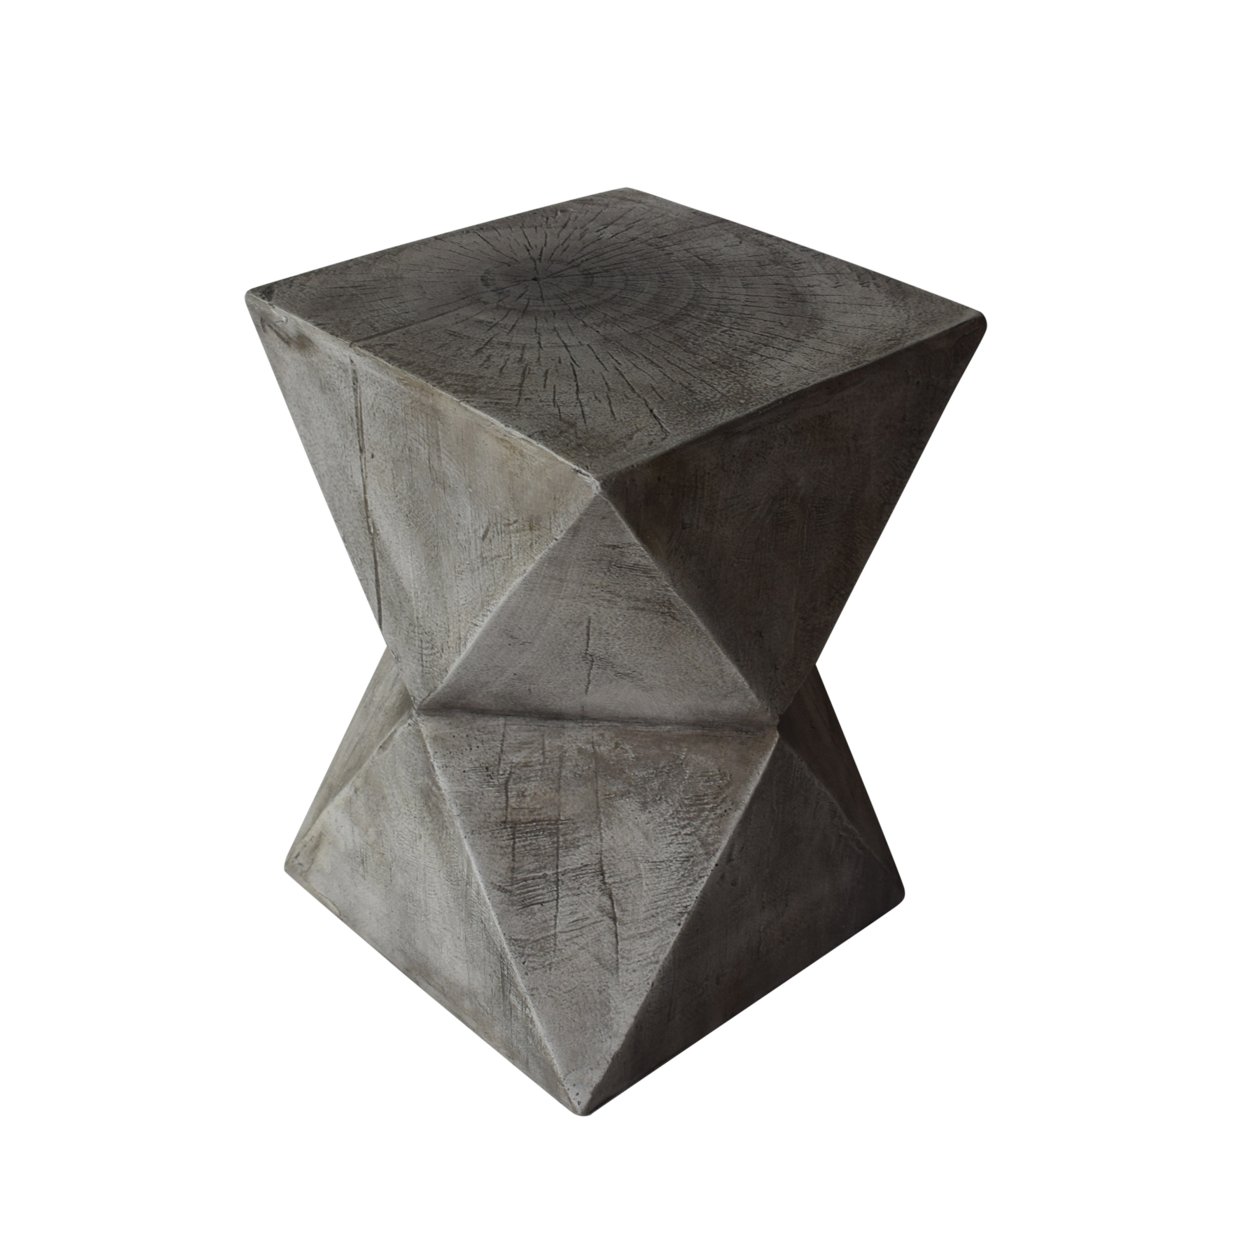 Lux Outdoor Light-Weight Concrete Accent Table - Natural